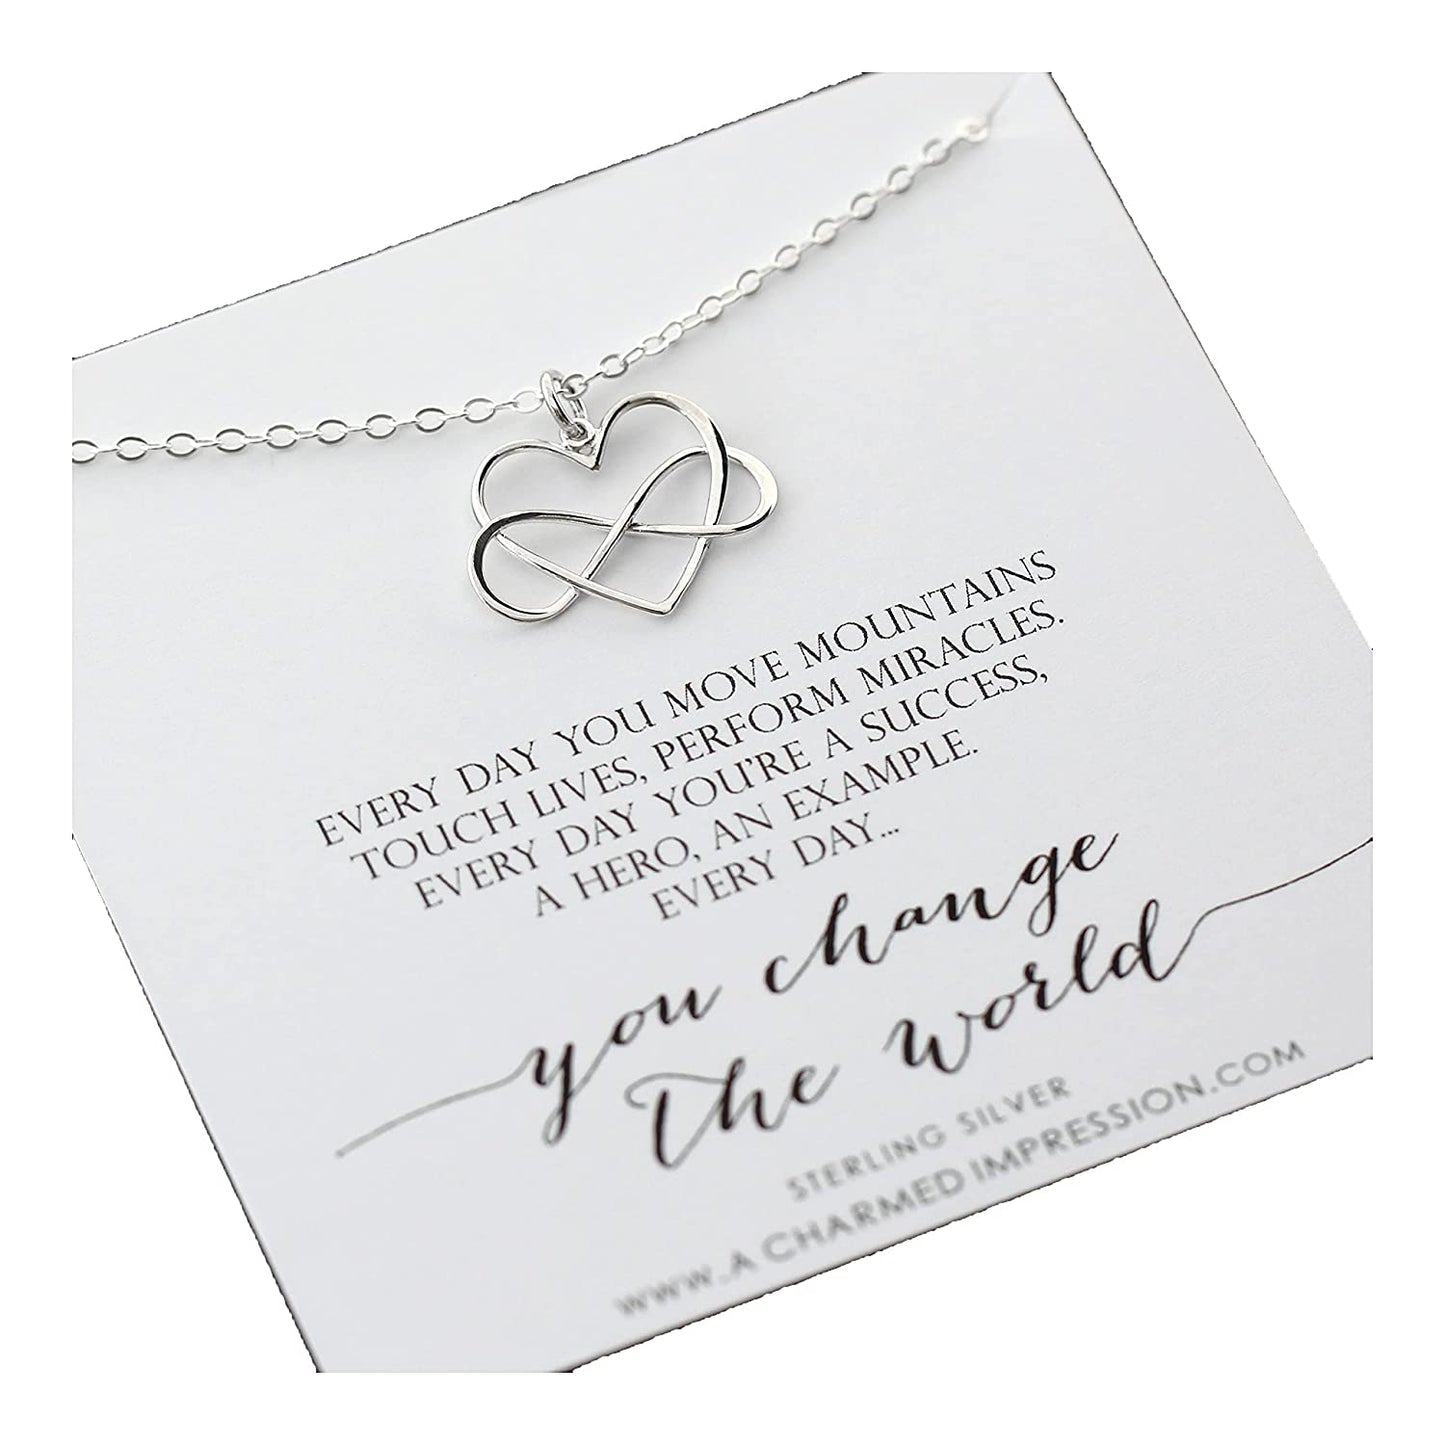 Everyday you change the world • 925 Sterling Silver • Infinity Heart Necklace • Gratitude Appreciation Gifts for Women • Inspirational Jewelry